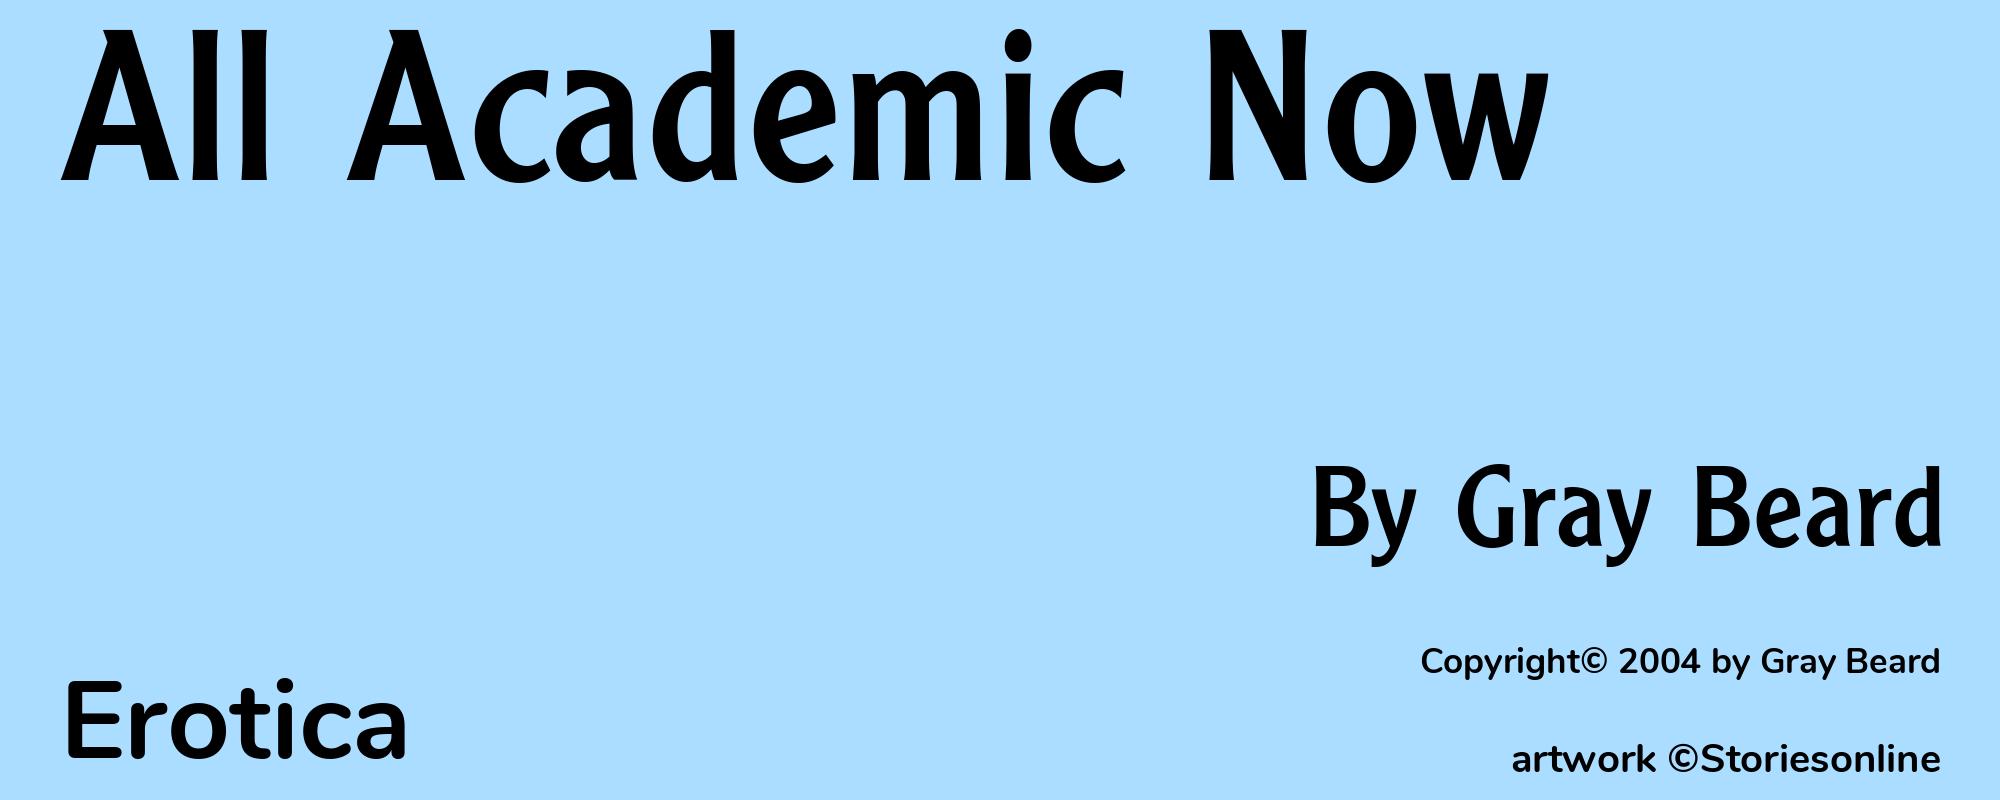 All Academic Now - Cover